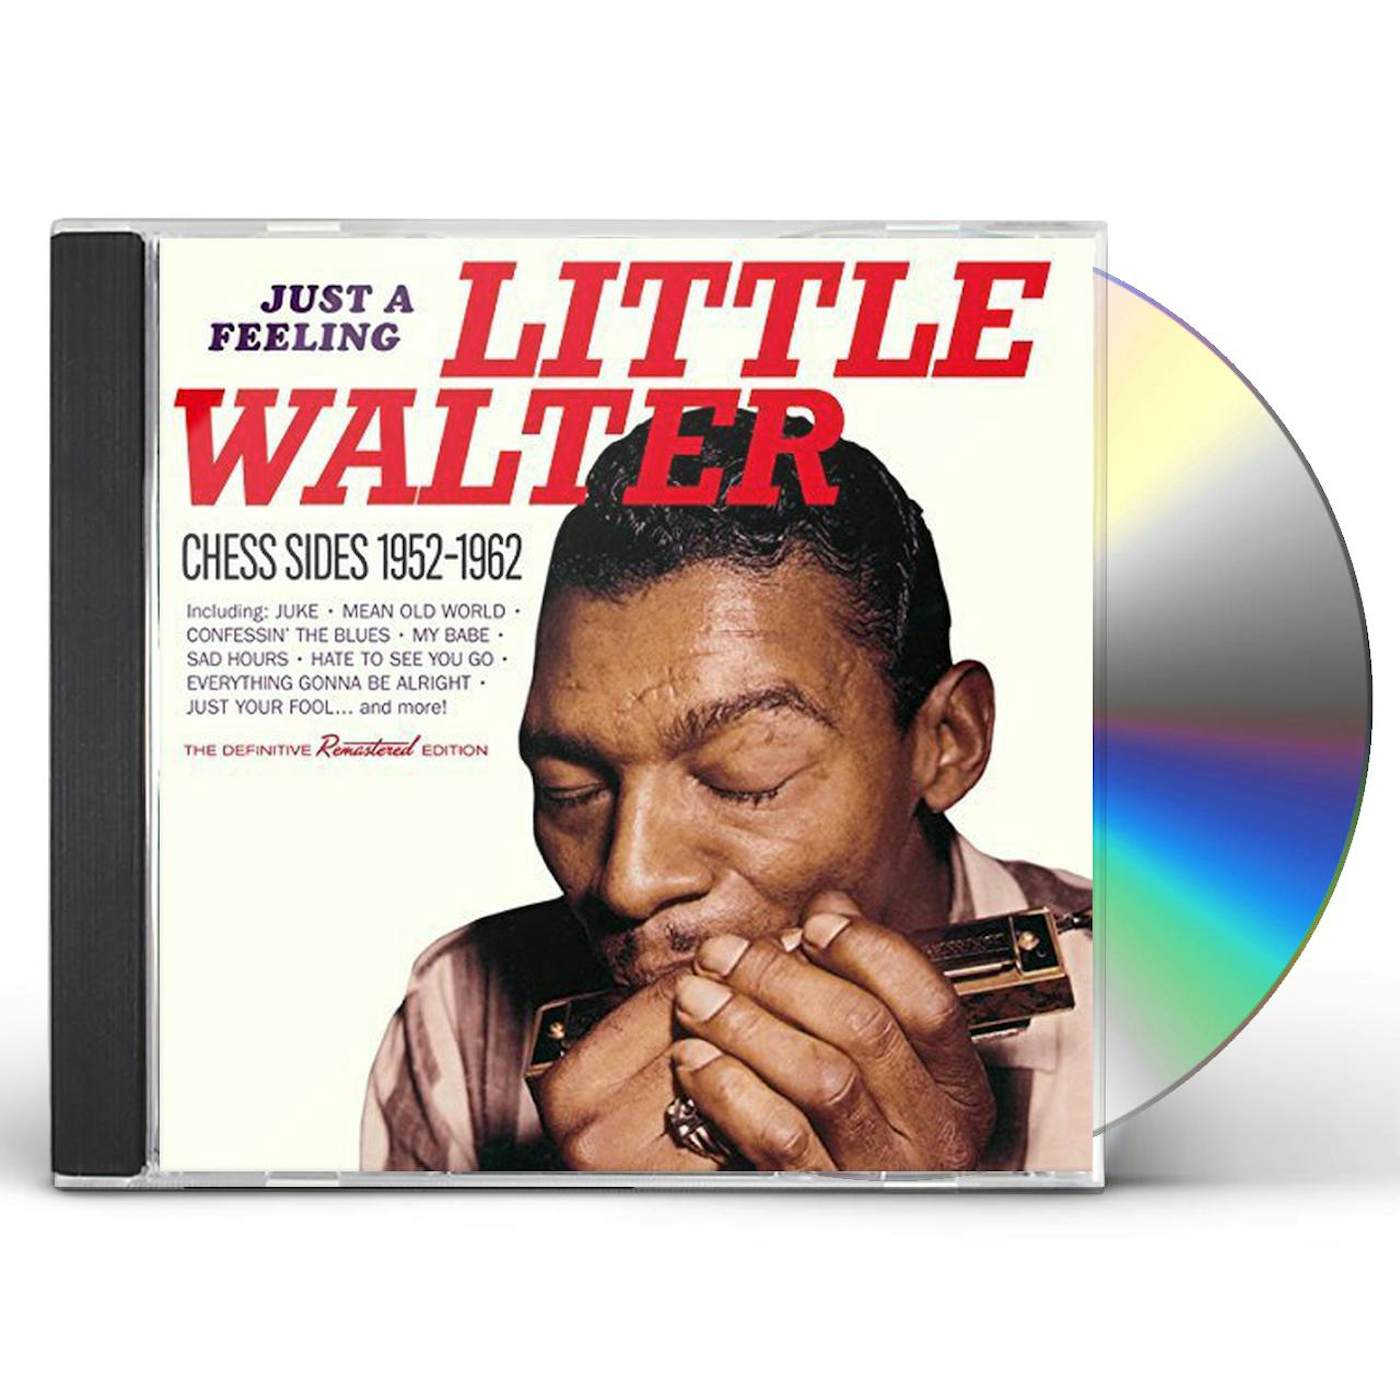 Little Walter JUST A FEELING: CHESS SIDES 1952-1962 CD